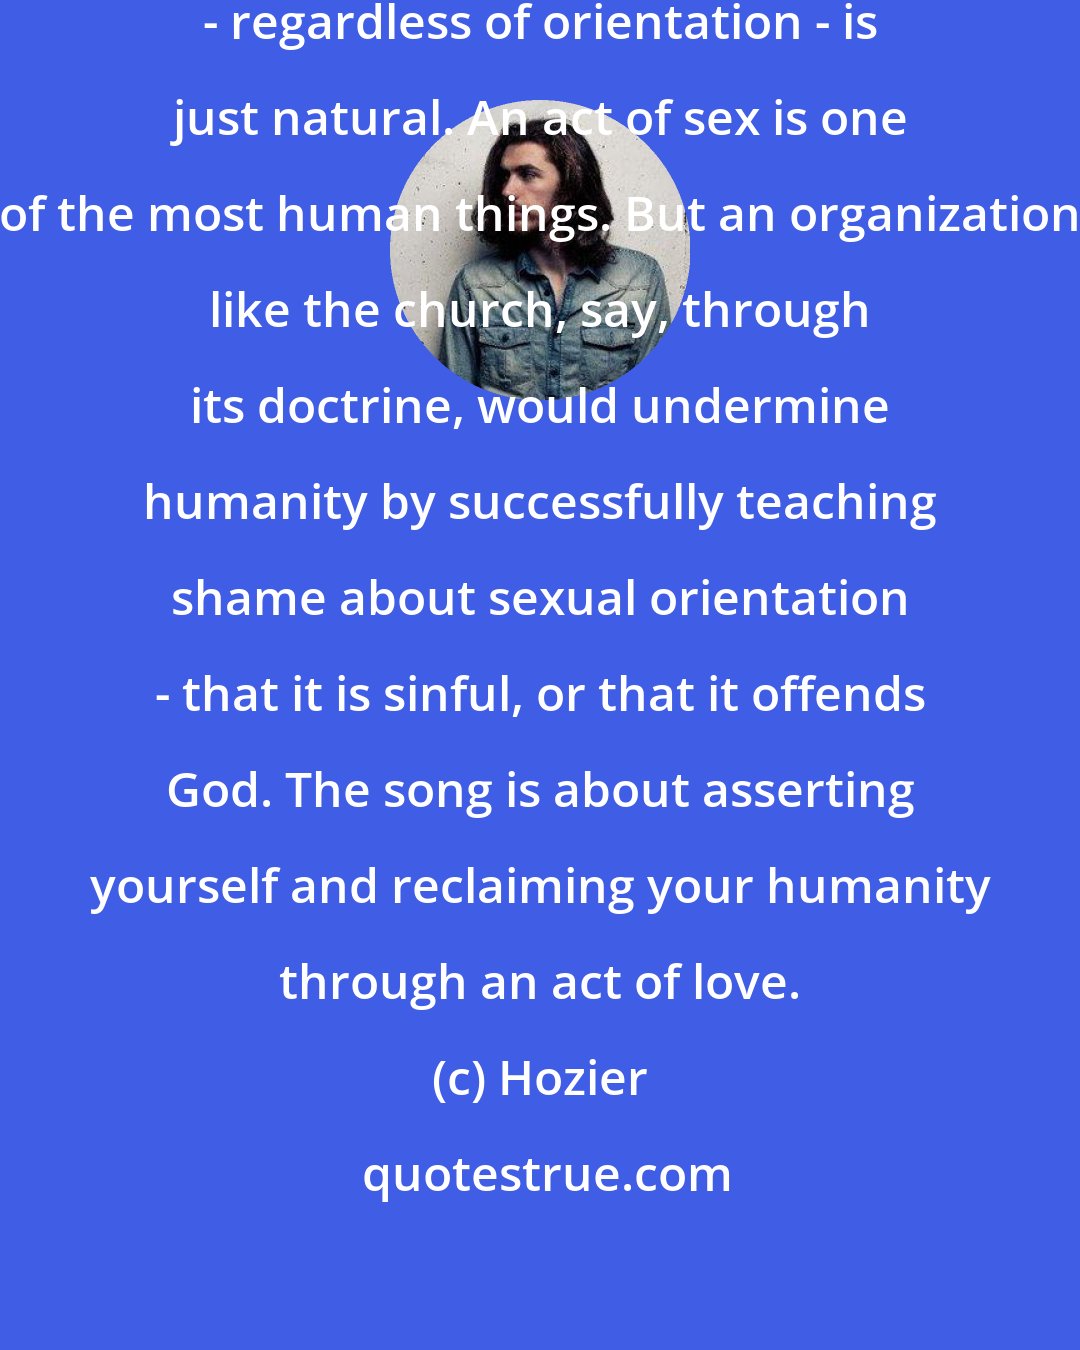 Hozier: Sexuality, and sexual orientation - regardless of orientation - is just natural. An act of sex is one of the most human things. But an organization like the church, say, through its doctrine, would undermine humanity by successfully teaching shame about sexual orientation - that it is sinful, or that it offends God. The song is about asserting yourself and reclaiming your humanity through an act of love.